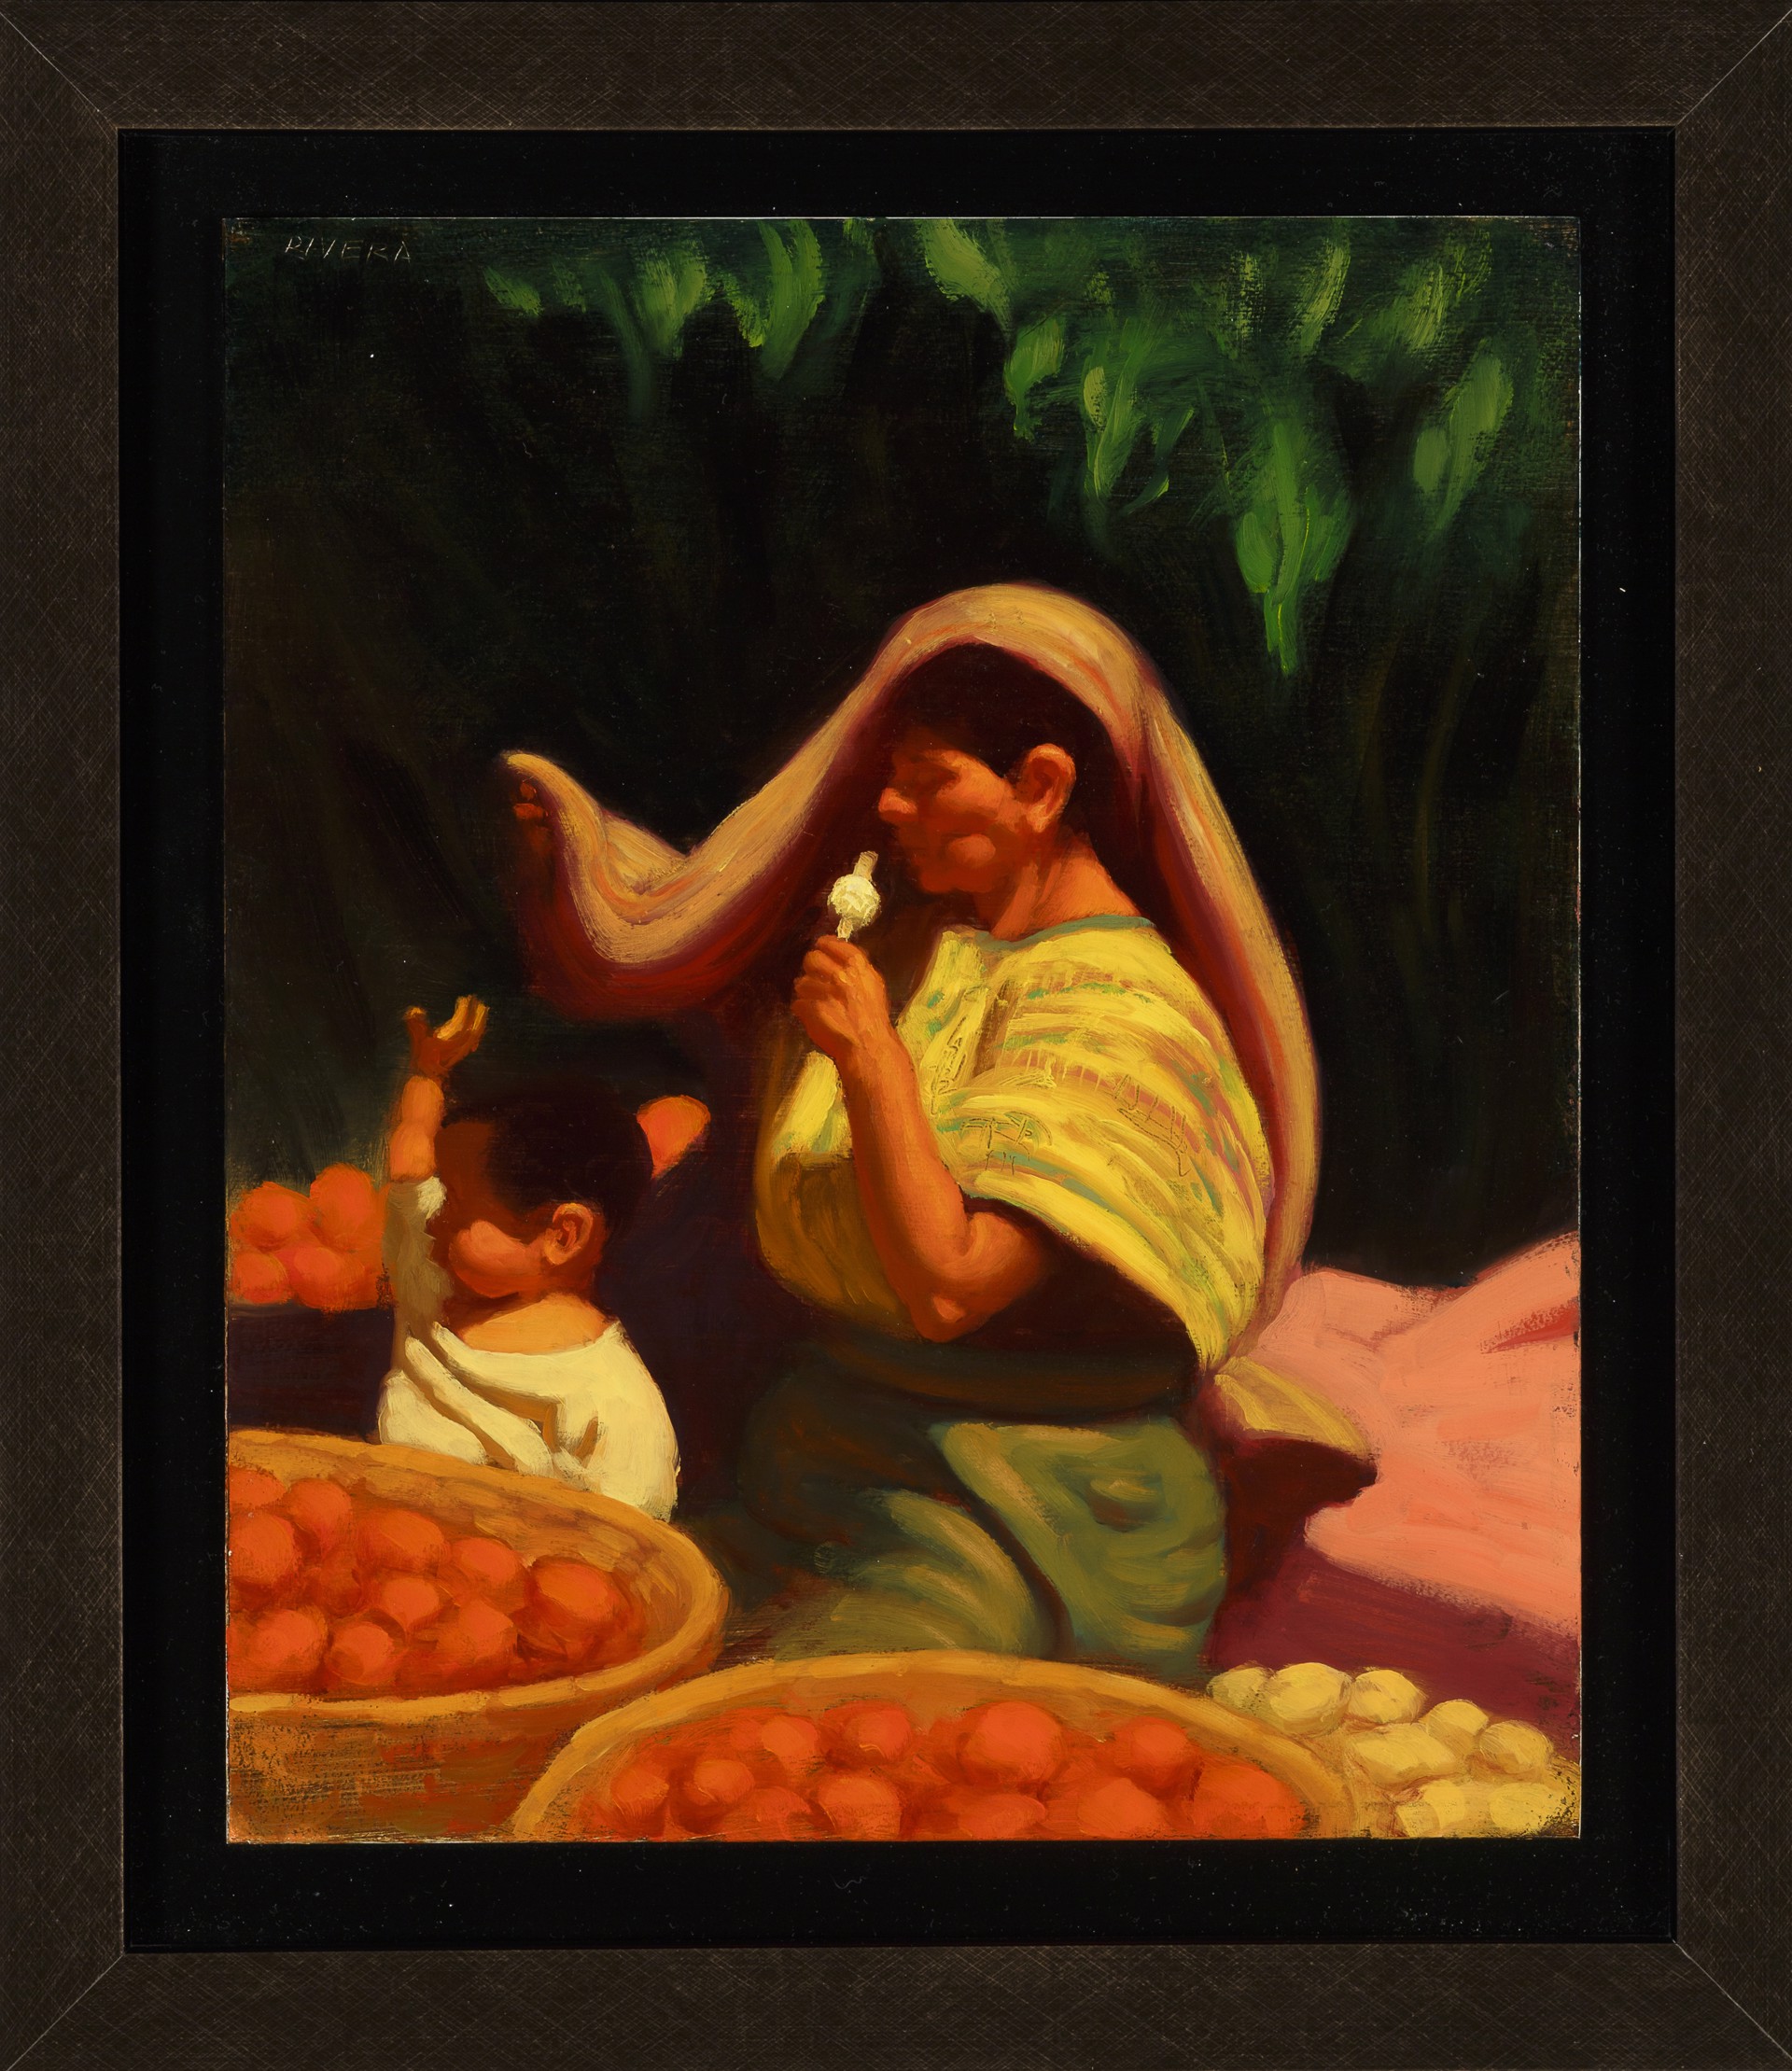 Untitled (Woman & Child in Market) by Elias Rivera